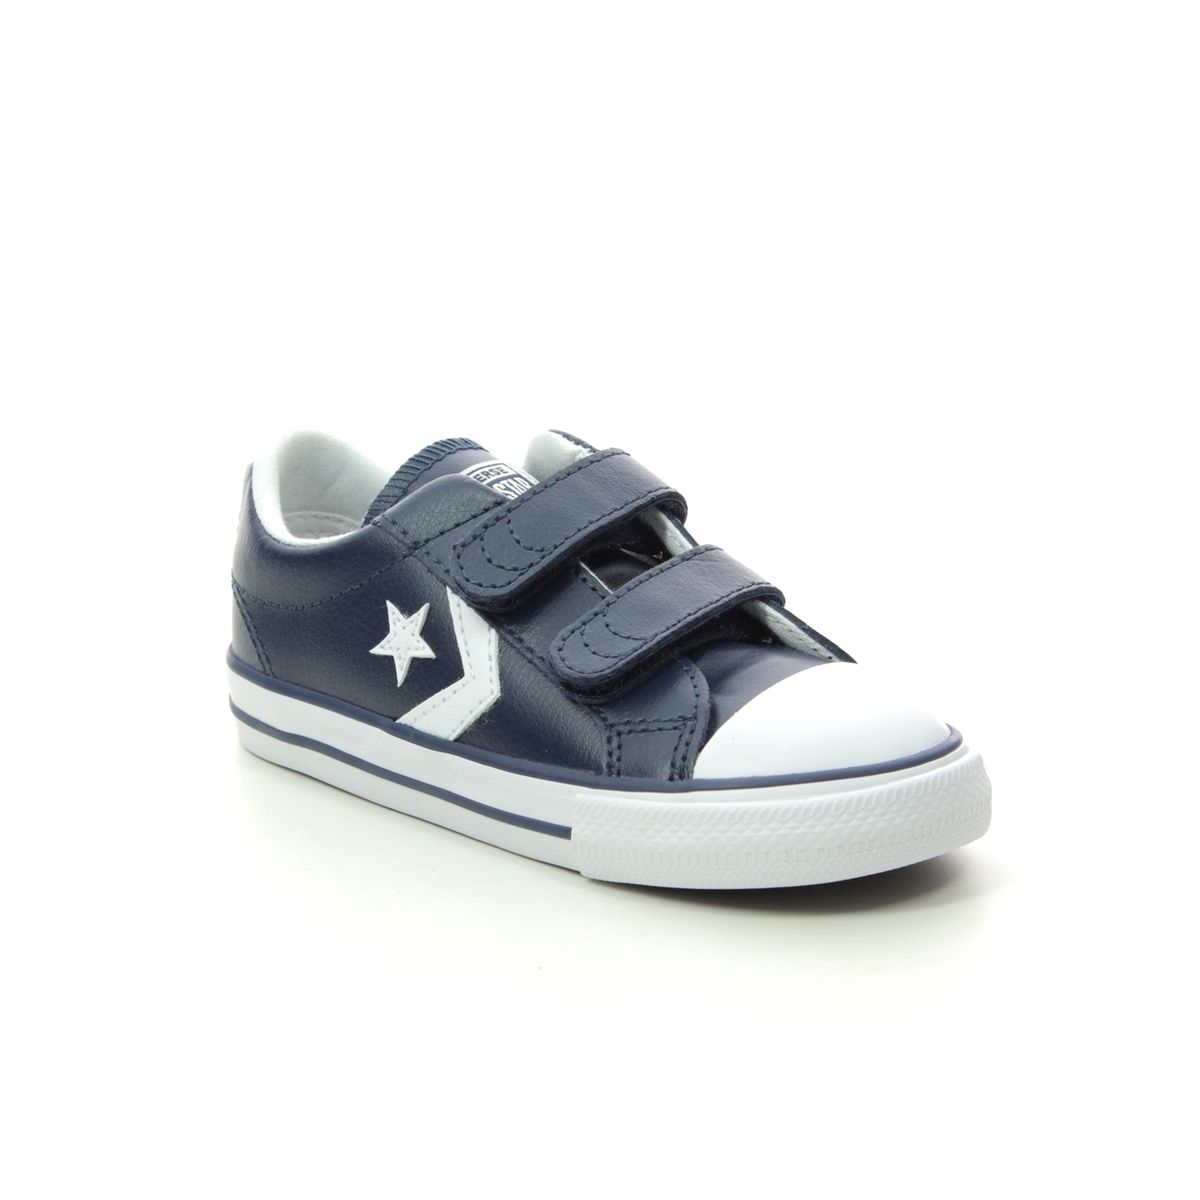 converse star player riptape trainers navy yellow